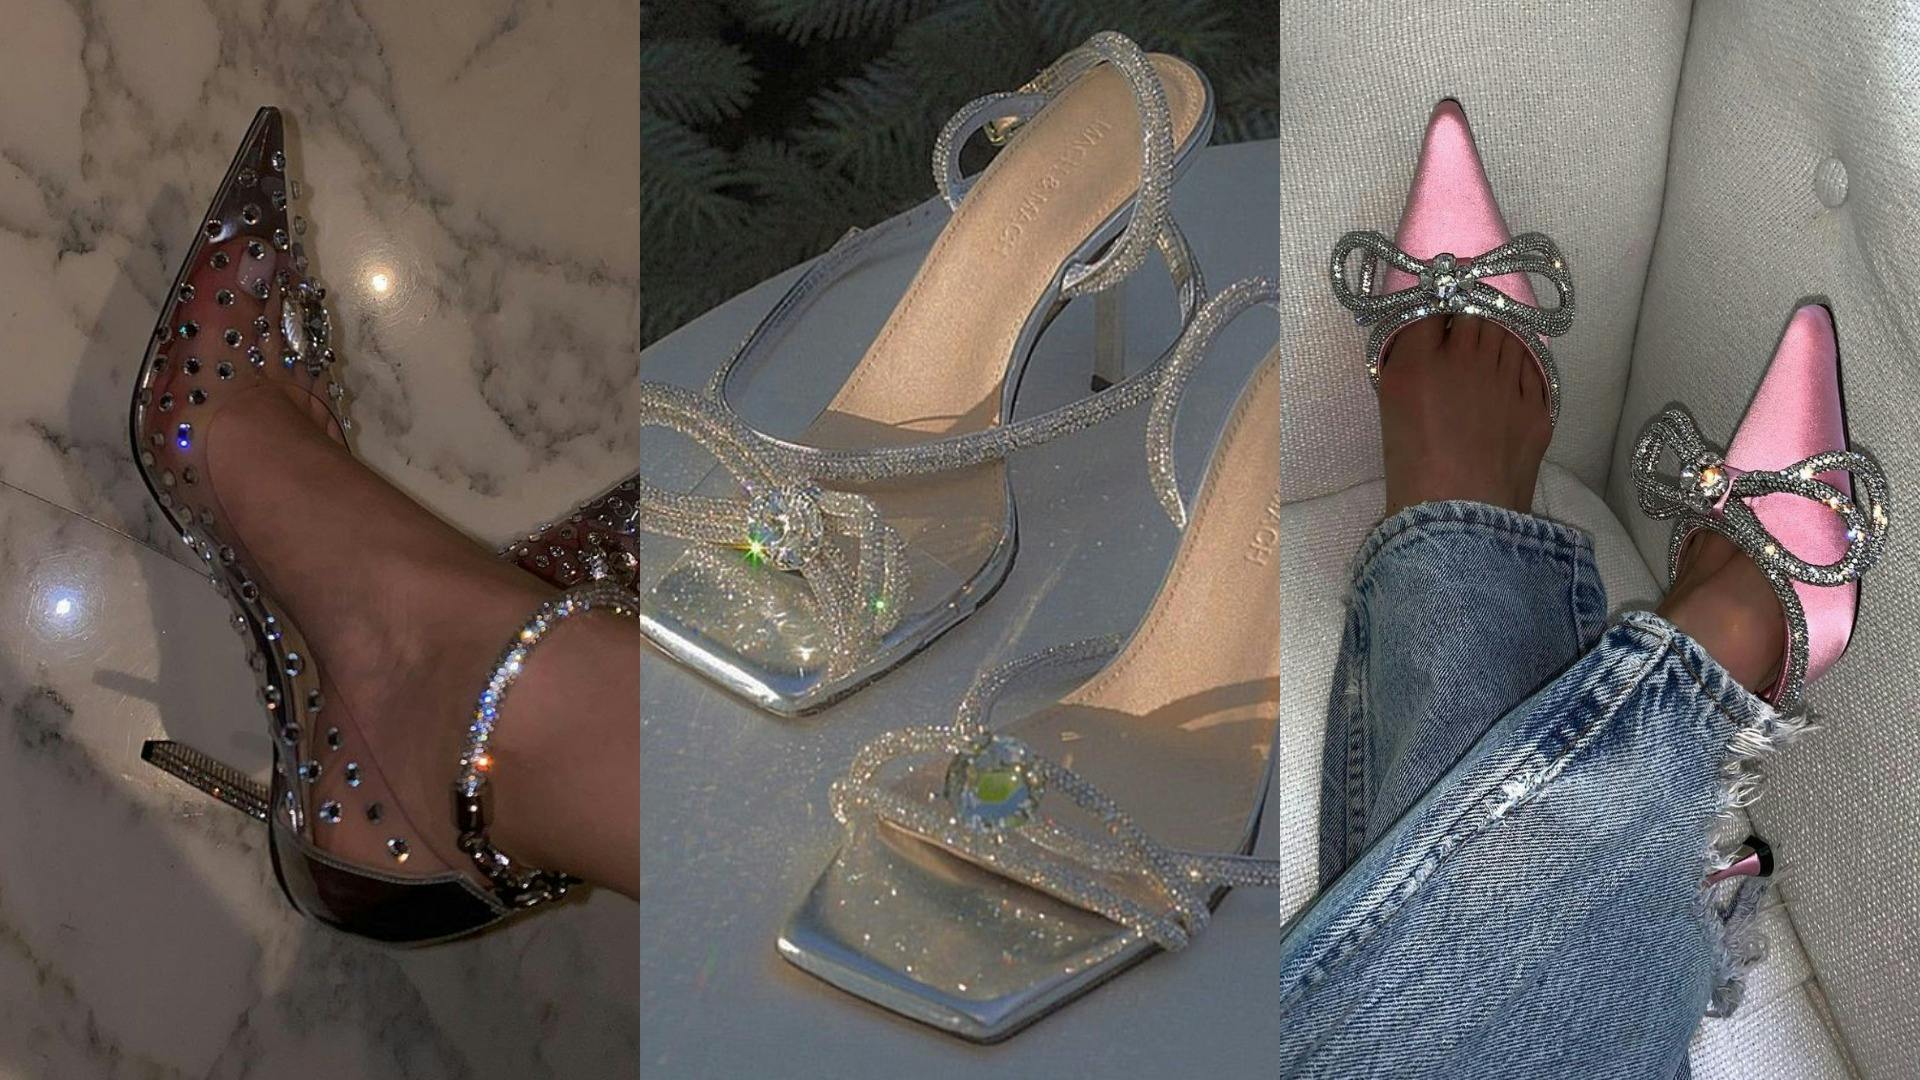 Cinderella shoes: The most unlikely trend of 2020, but perfect for Christmas